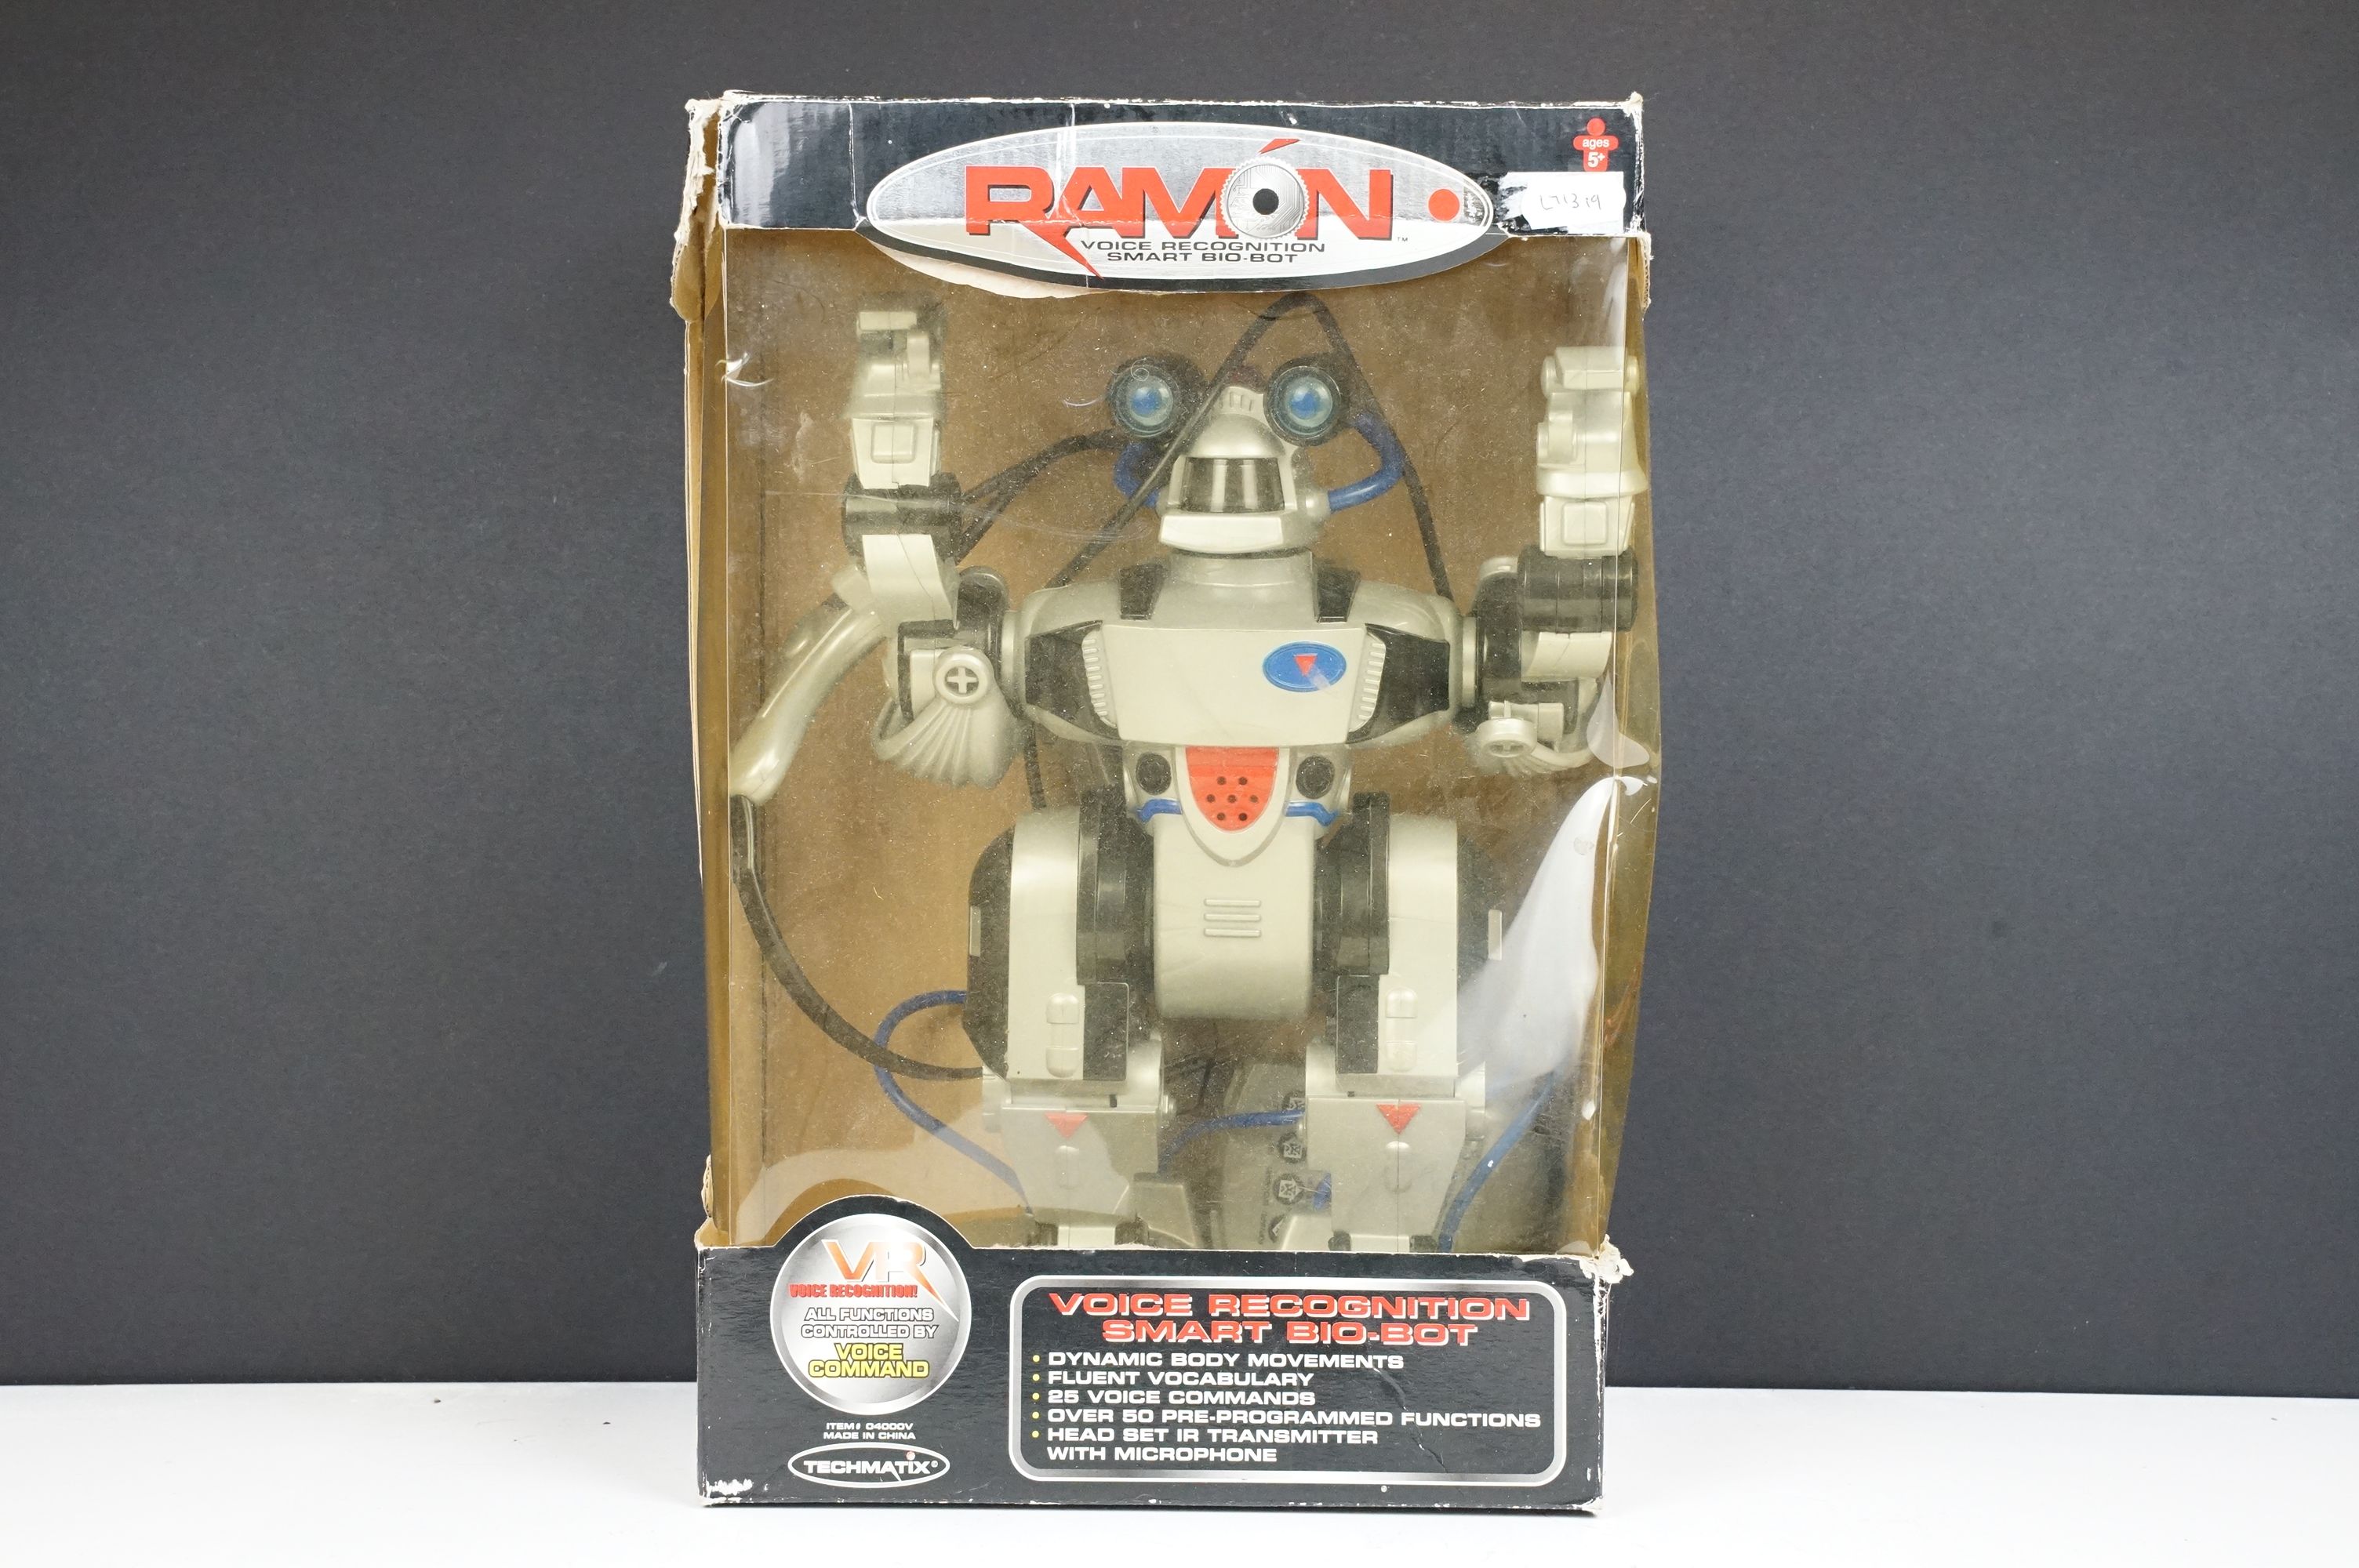 Boxed Ramon voice recognition smart bio bot robot in original packaging.